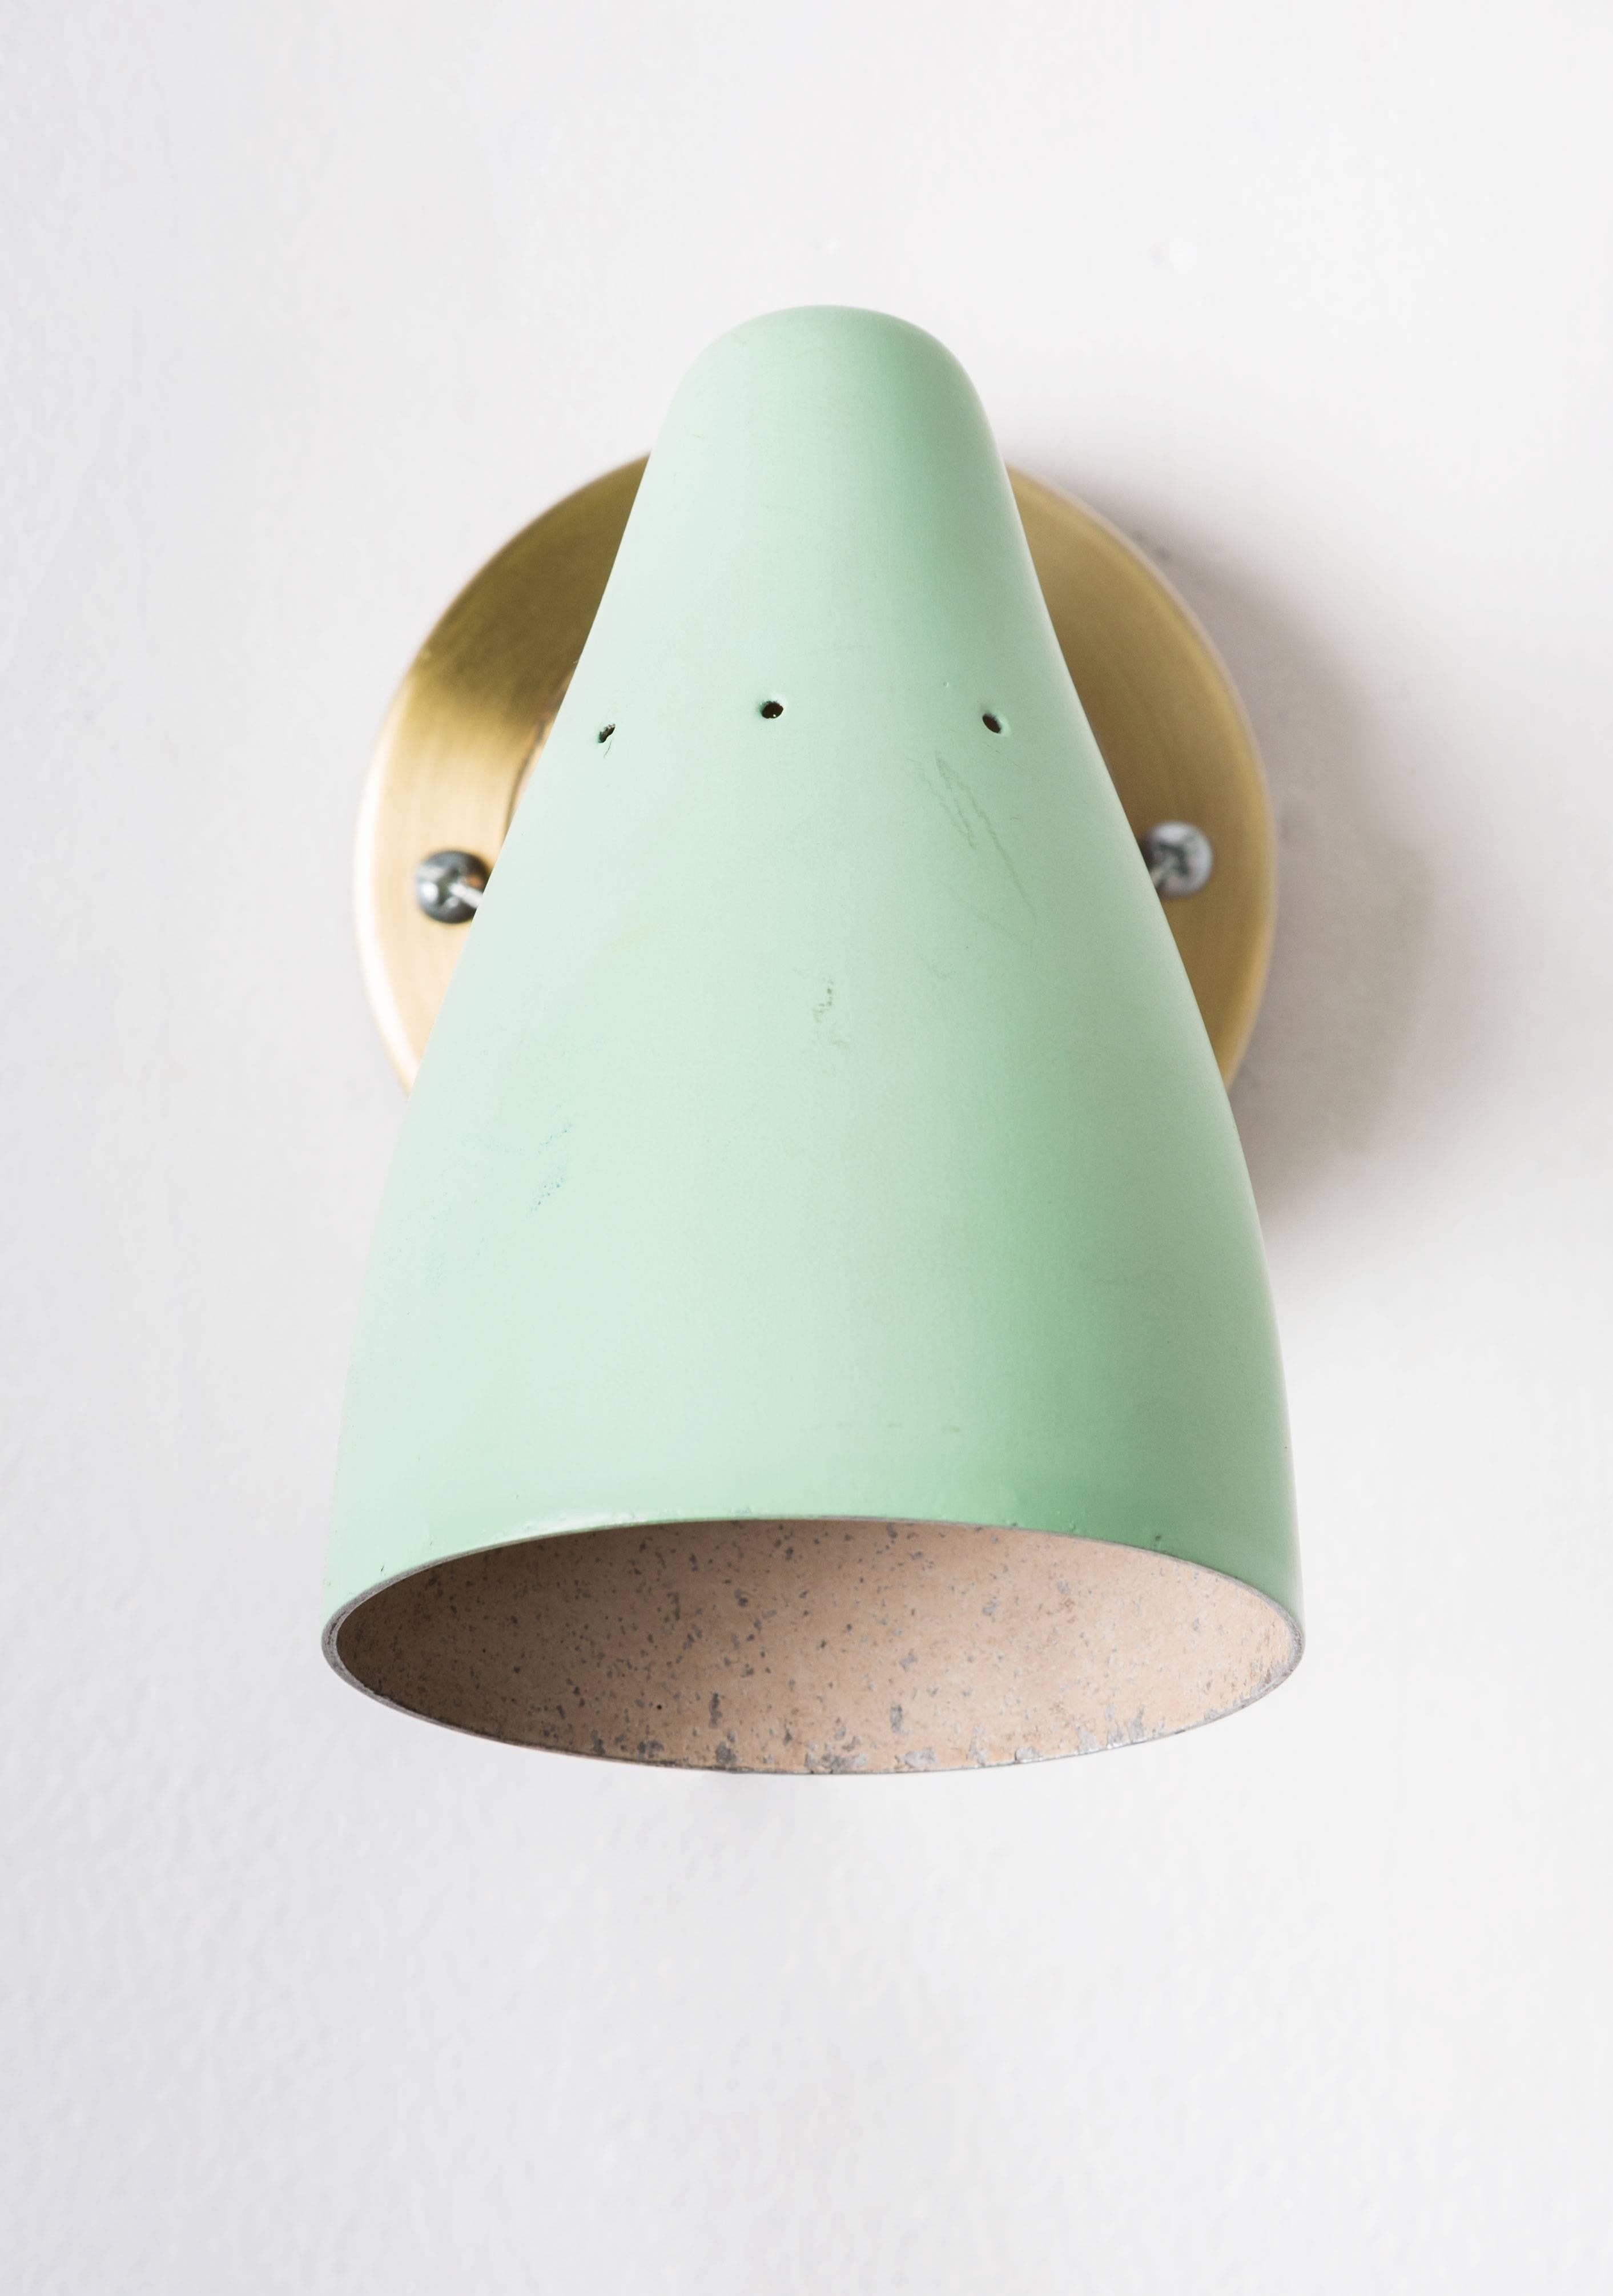 1950s Petite Italian Sconces in the manner of Giuseppe Ostuni. Executed in green enameled metal shades and patinated brass wall mounts modified for US electrical.